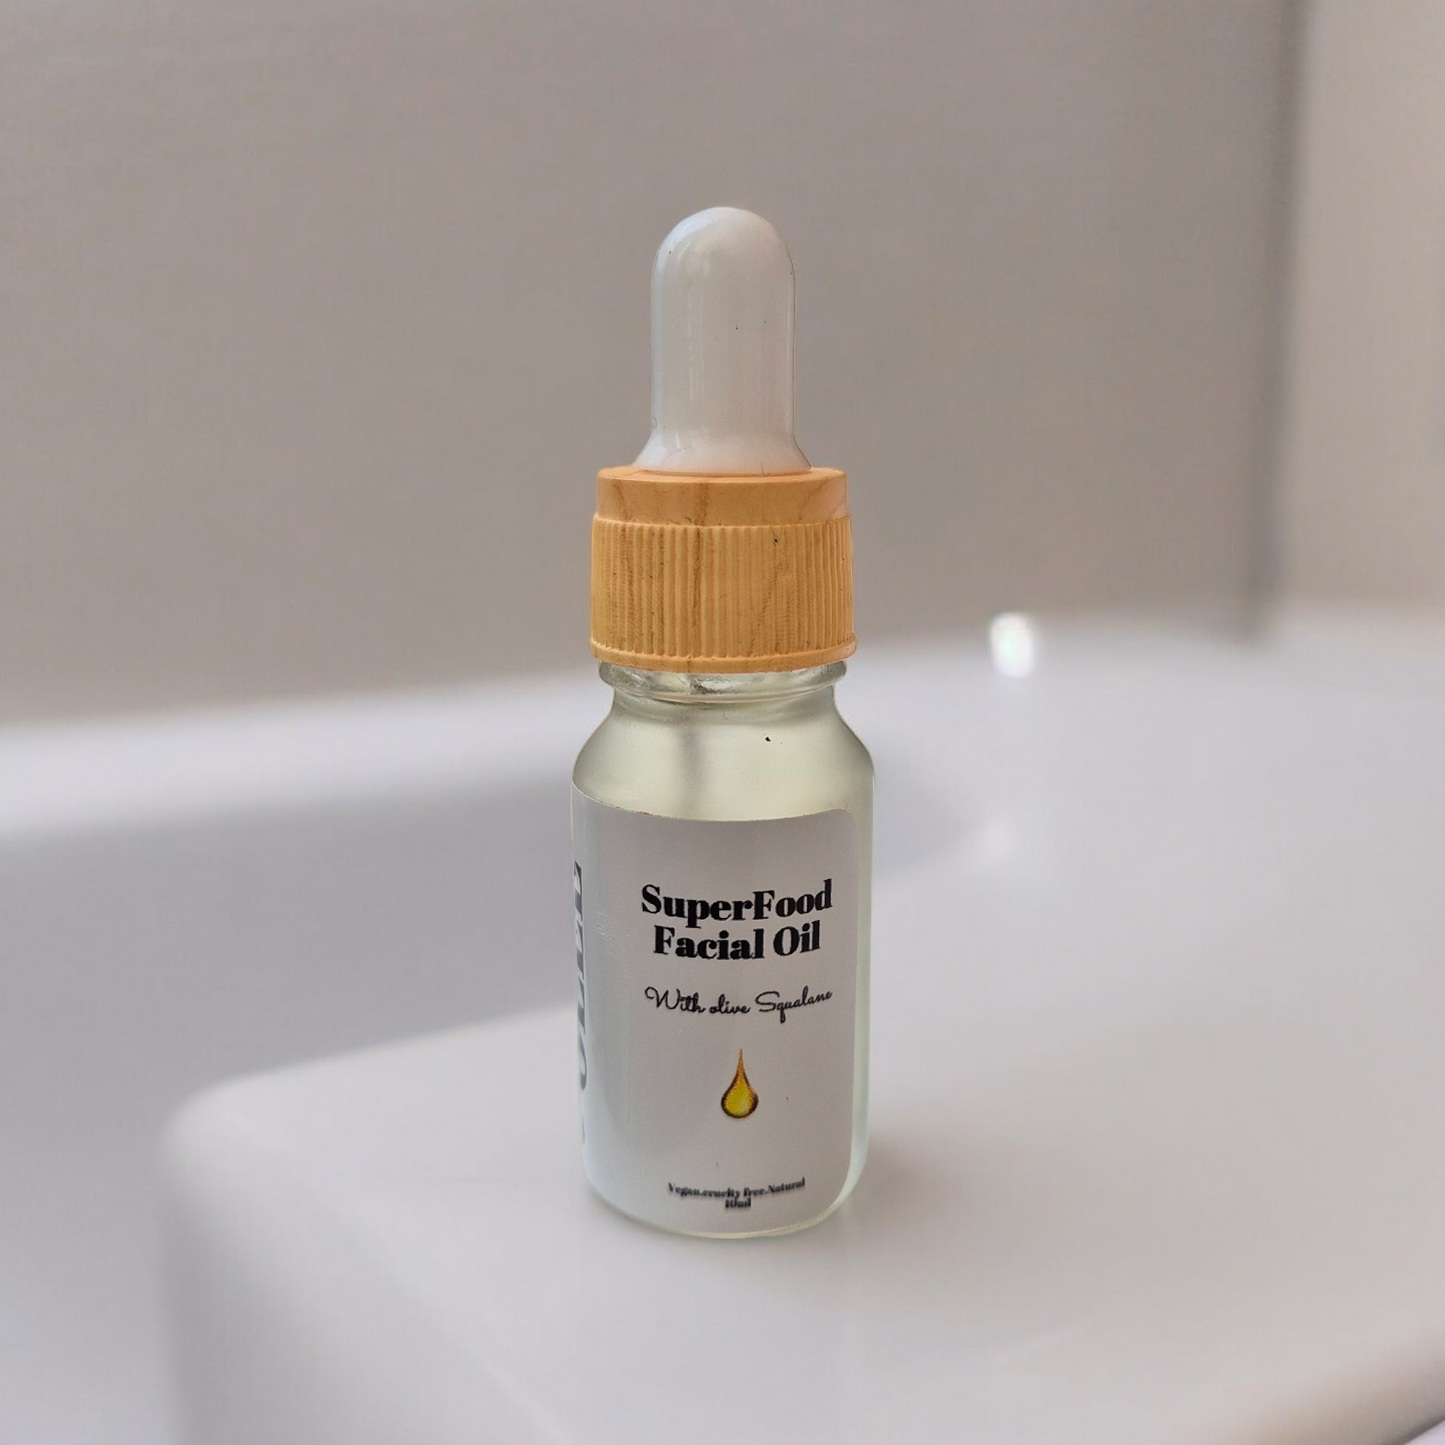 Superfood Facial oil